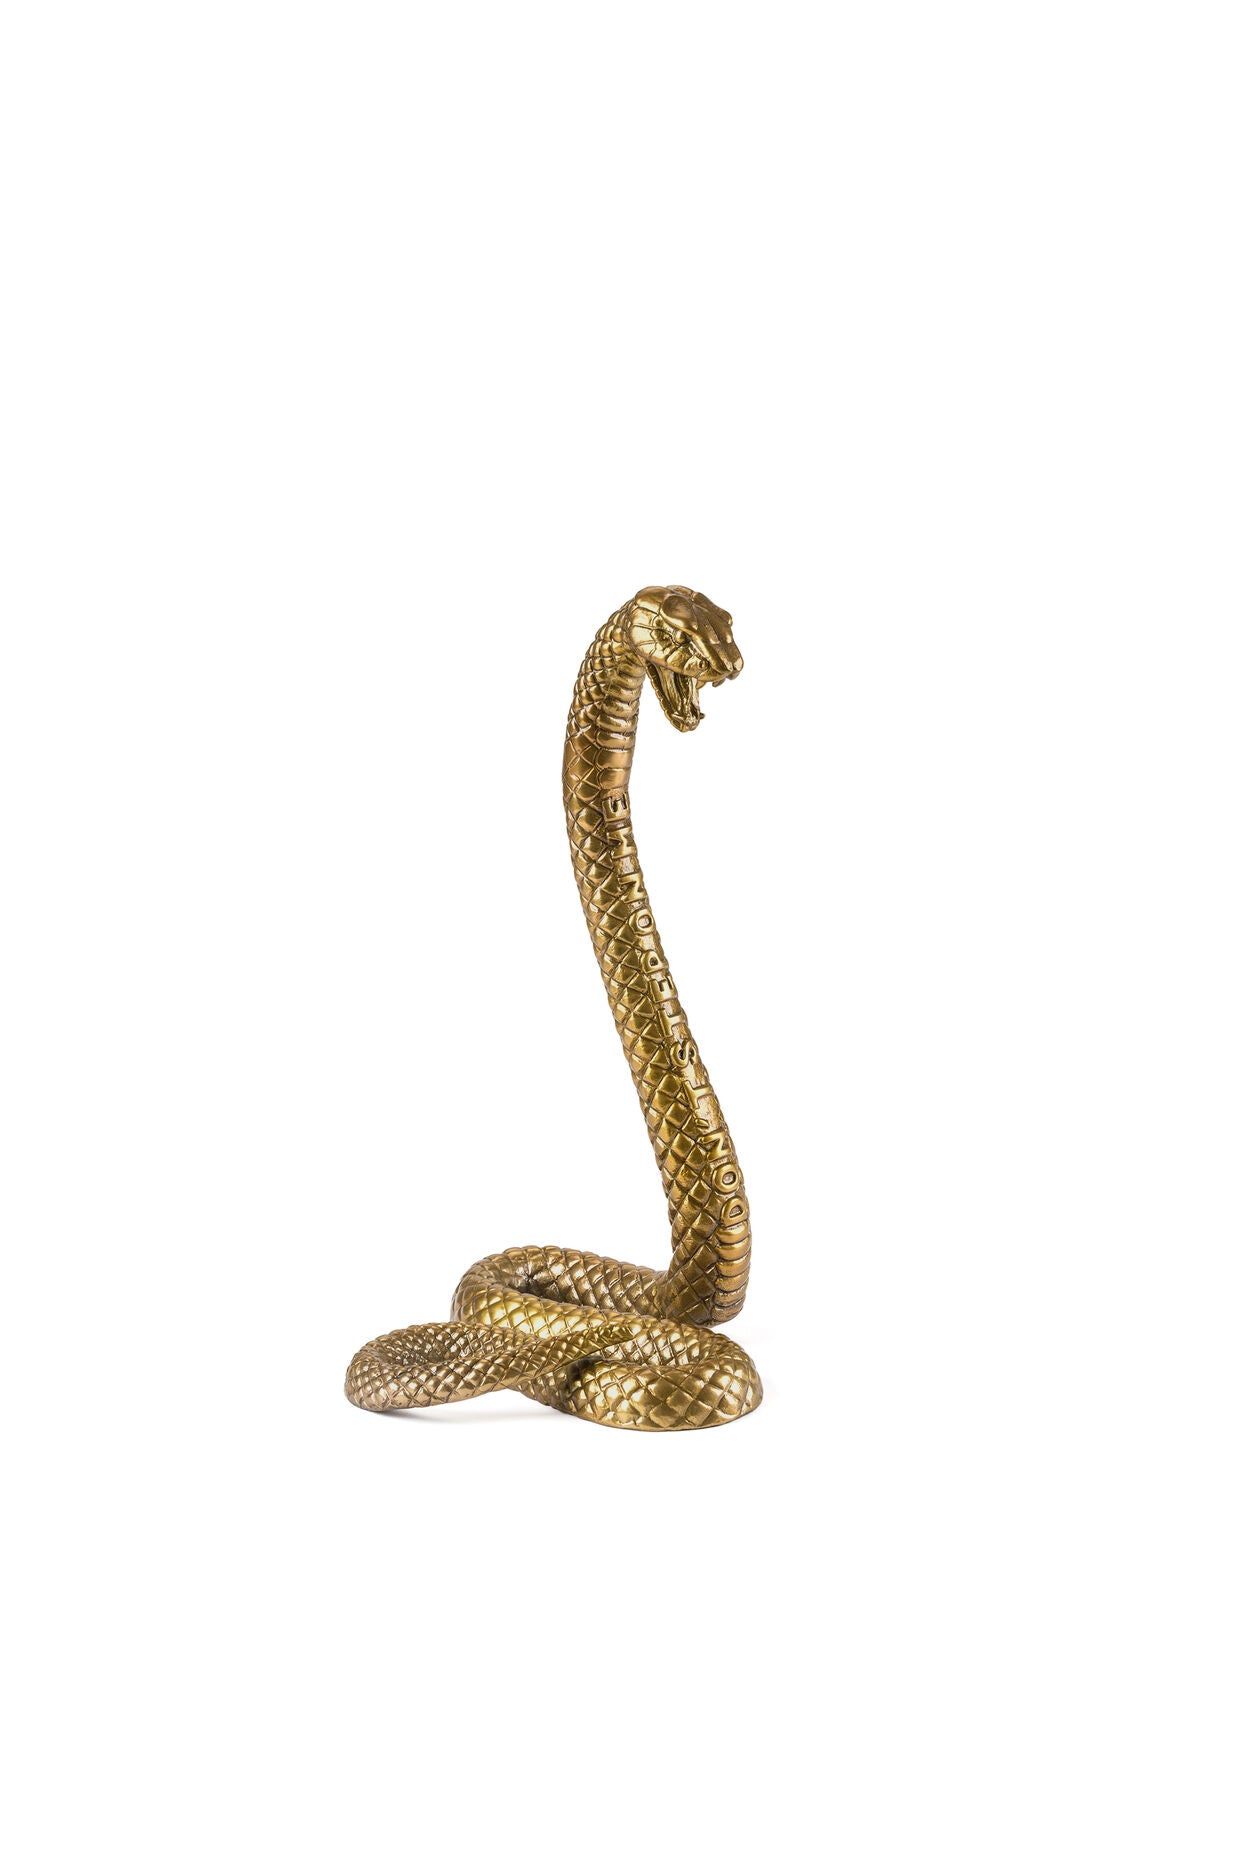 Gold snake ornament with the words "Don't Step On Me" engraved is from the Diesel Living - Wunderkammer collection by Seletti.  A decorative piece made from aluminium. 